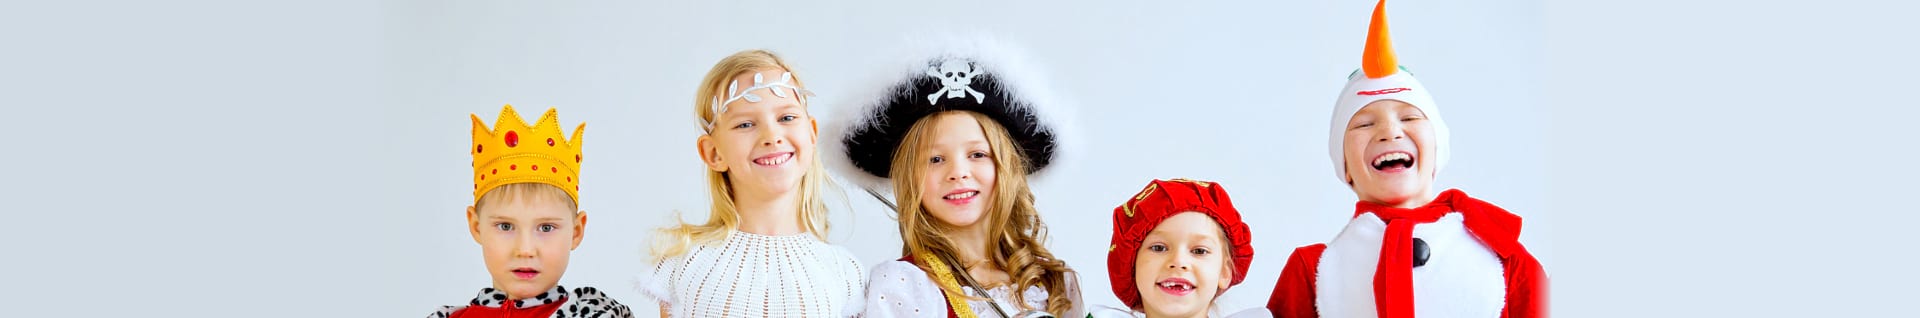 group of kids wearing costume